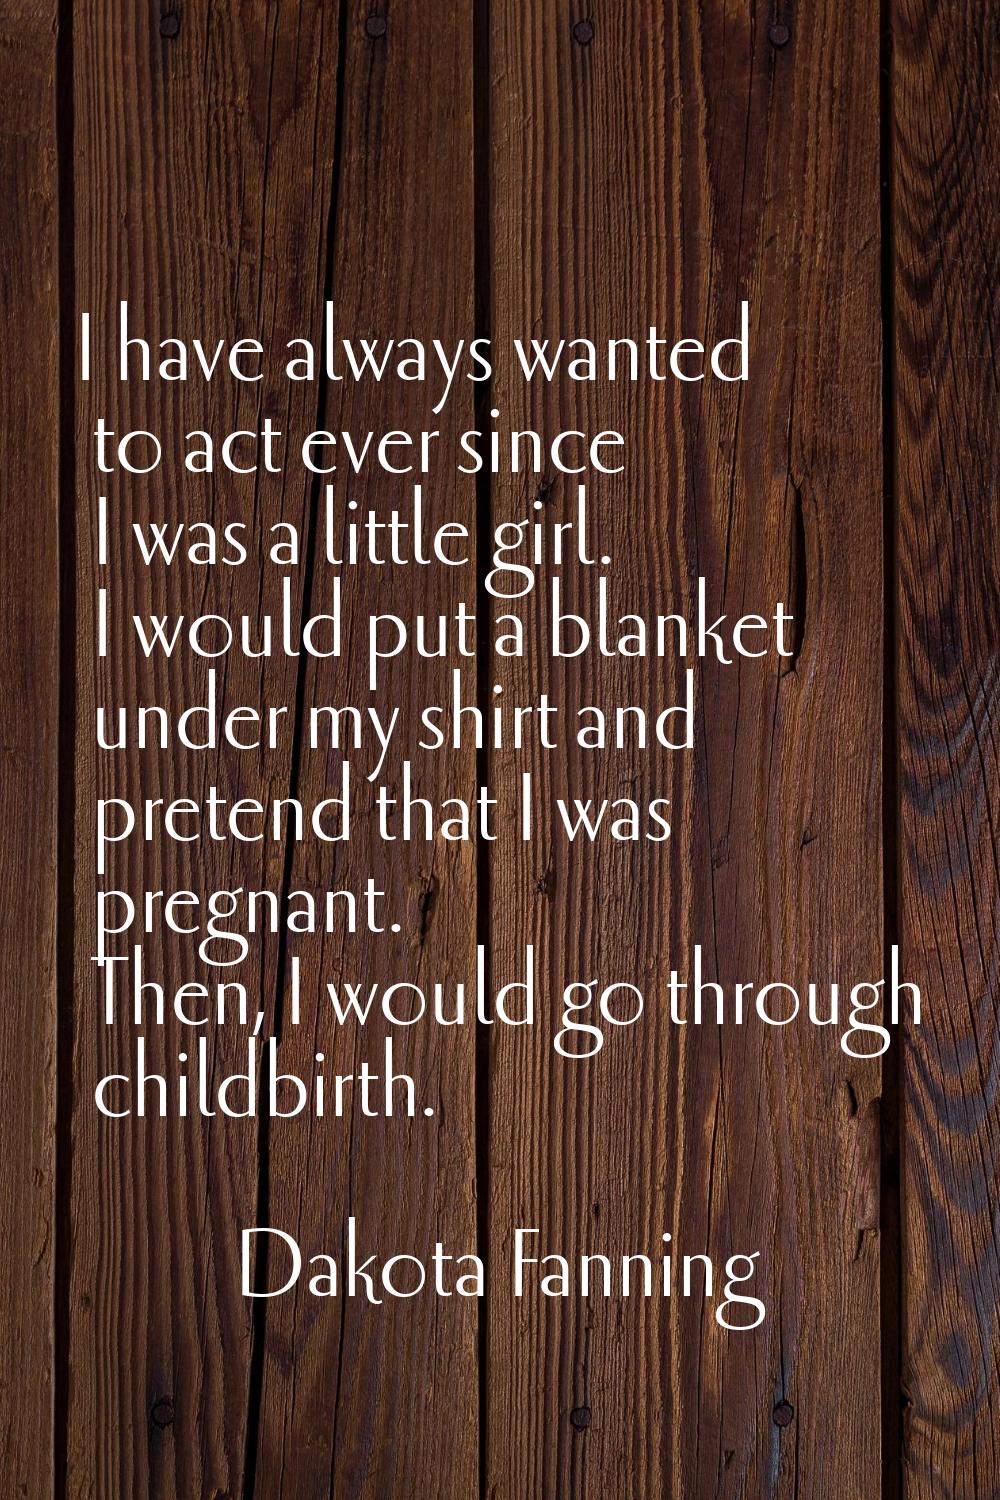 I have always wanted to act ever since I was a little girl. I would put a blanket under my shirt an